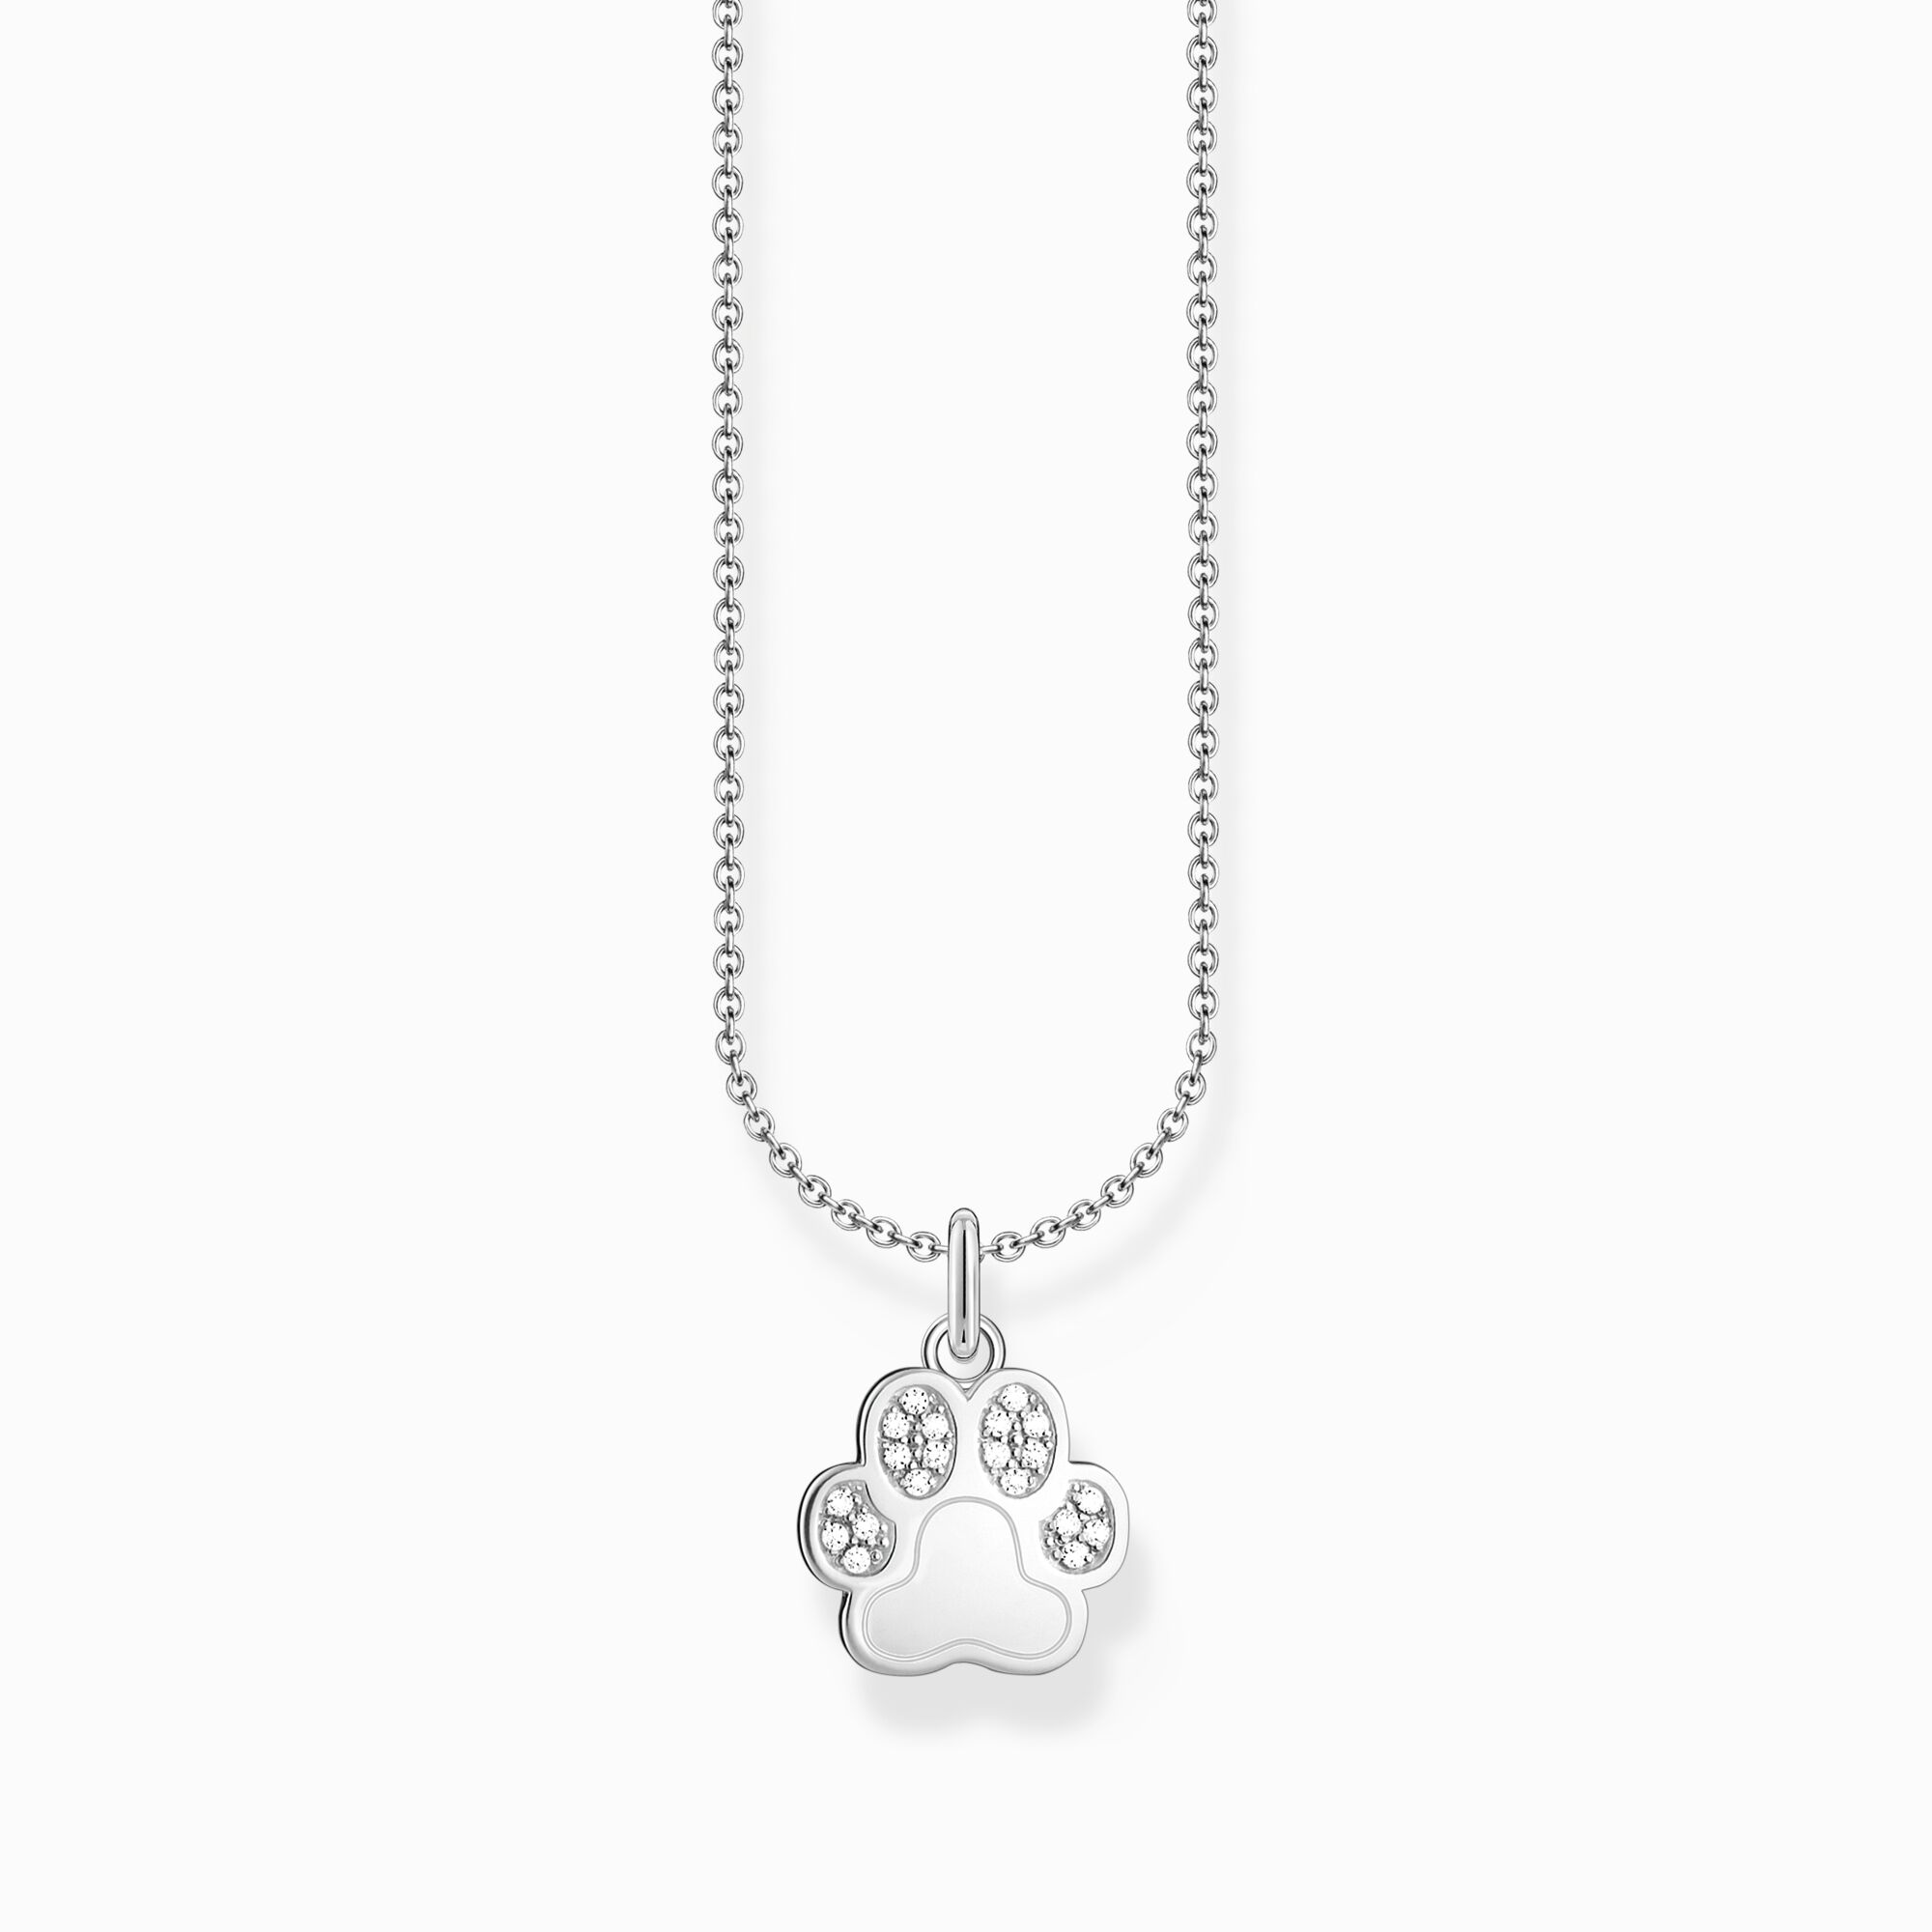 Silver necklace with paw pendant and white zirconia from the Charming Collection collection in the THOMAS SABO online store